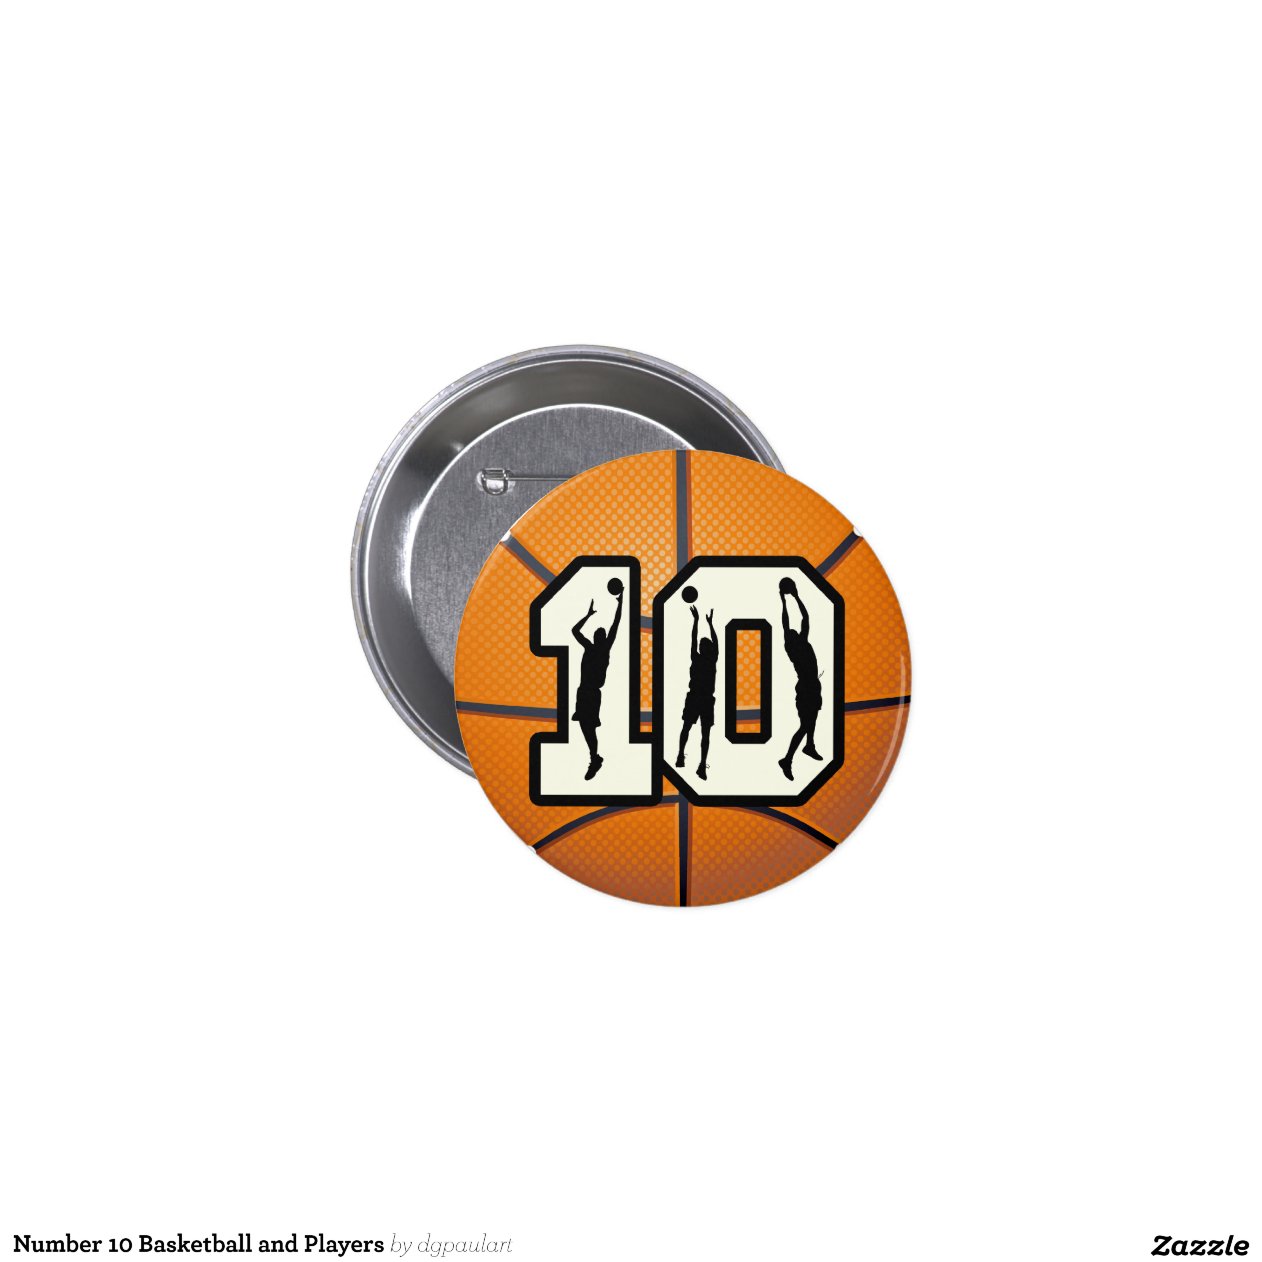 Number 10 Basketball and Players Pins | Zazzle